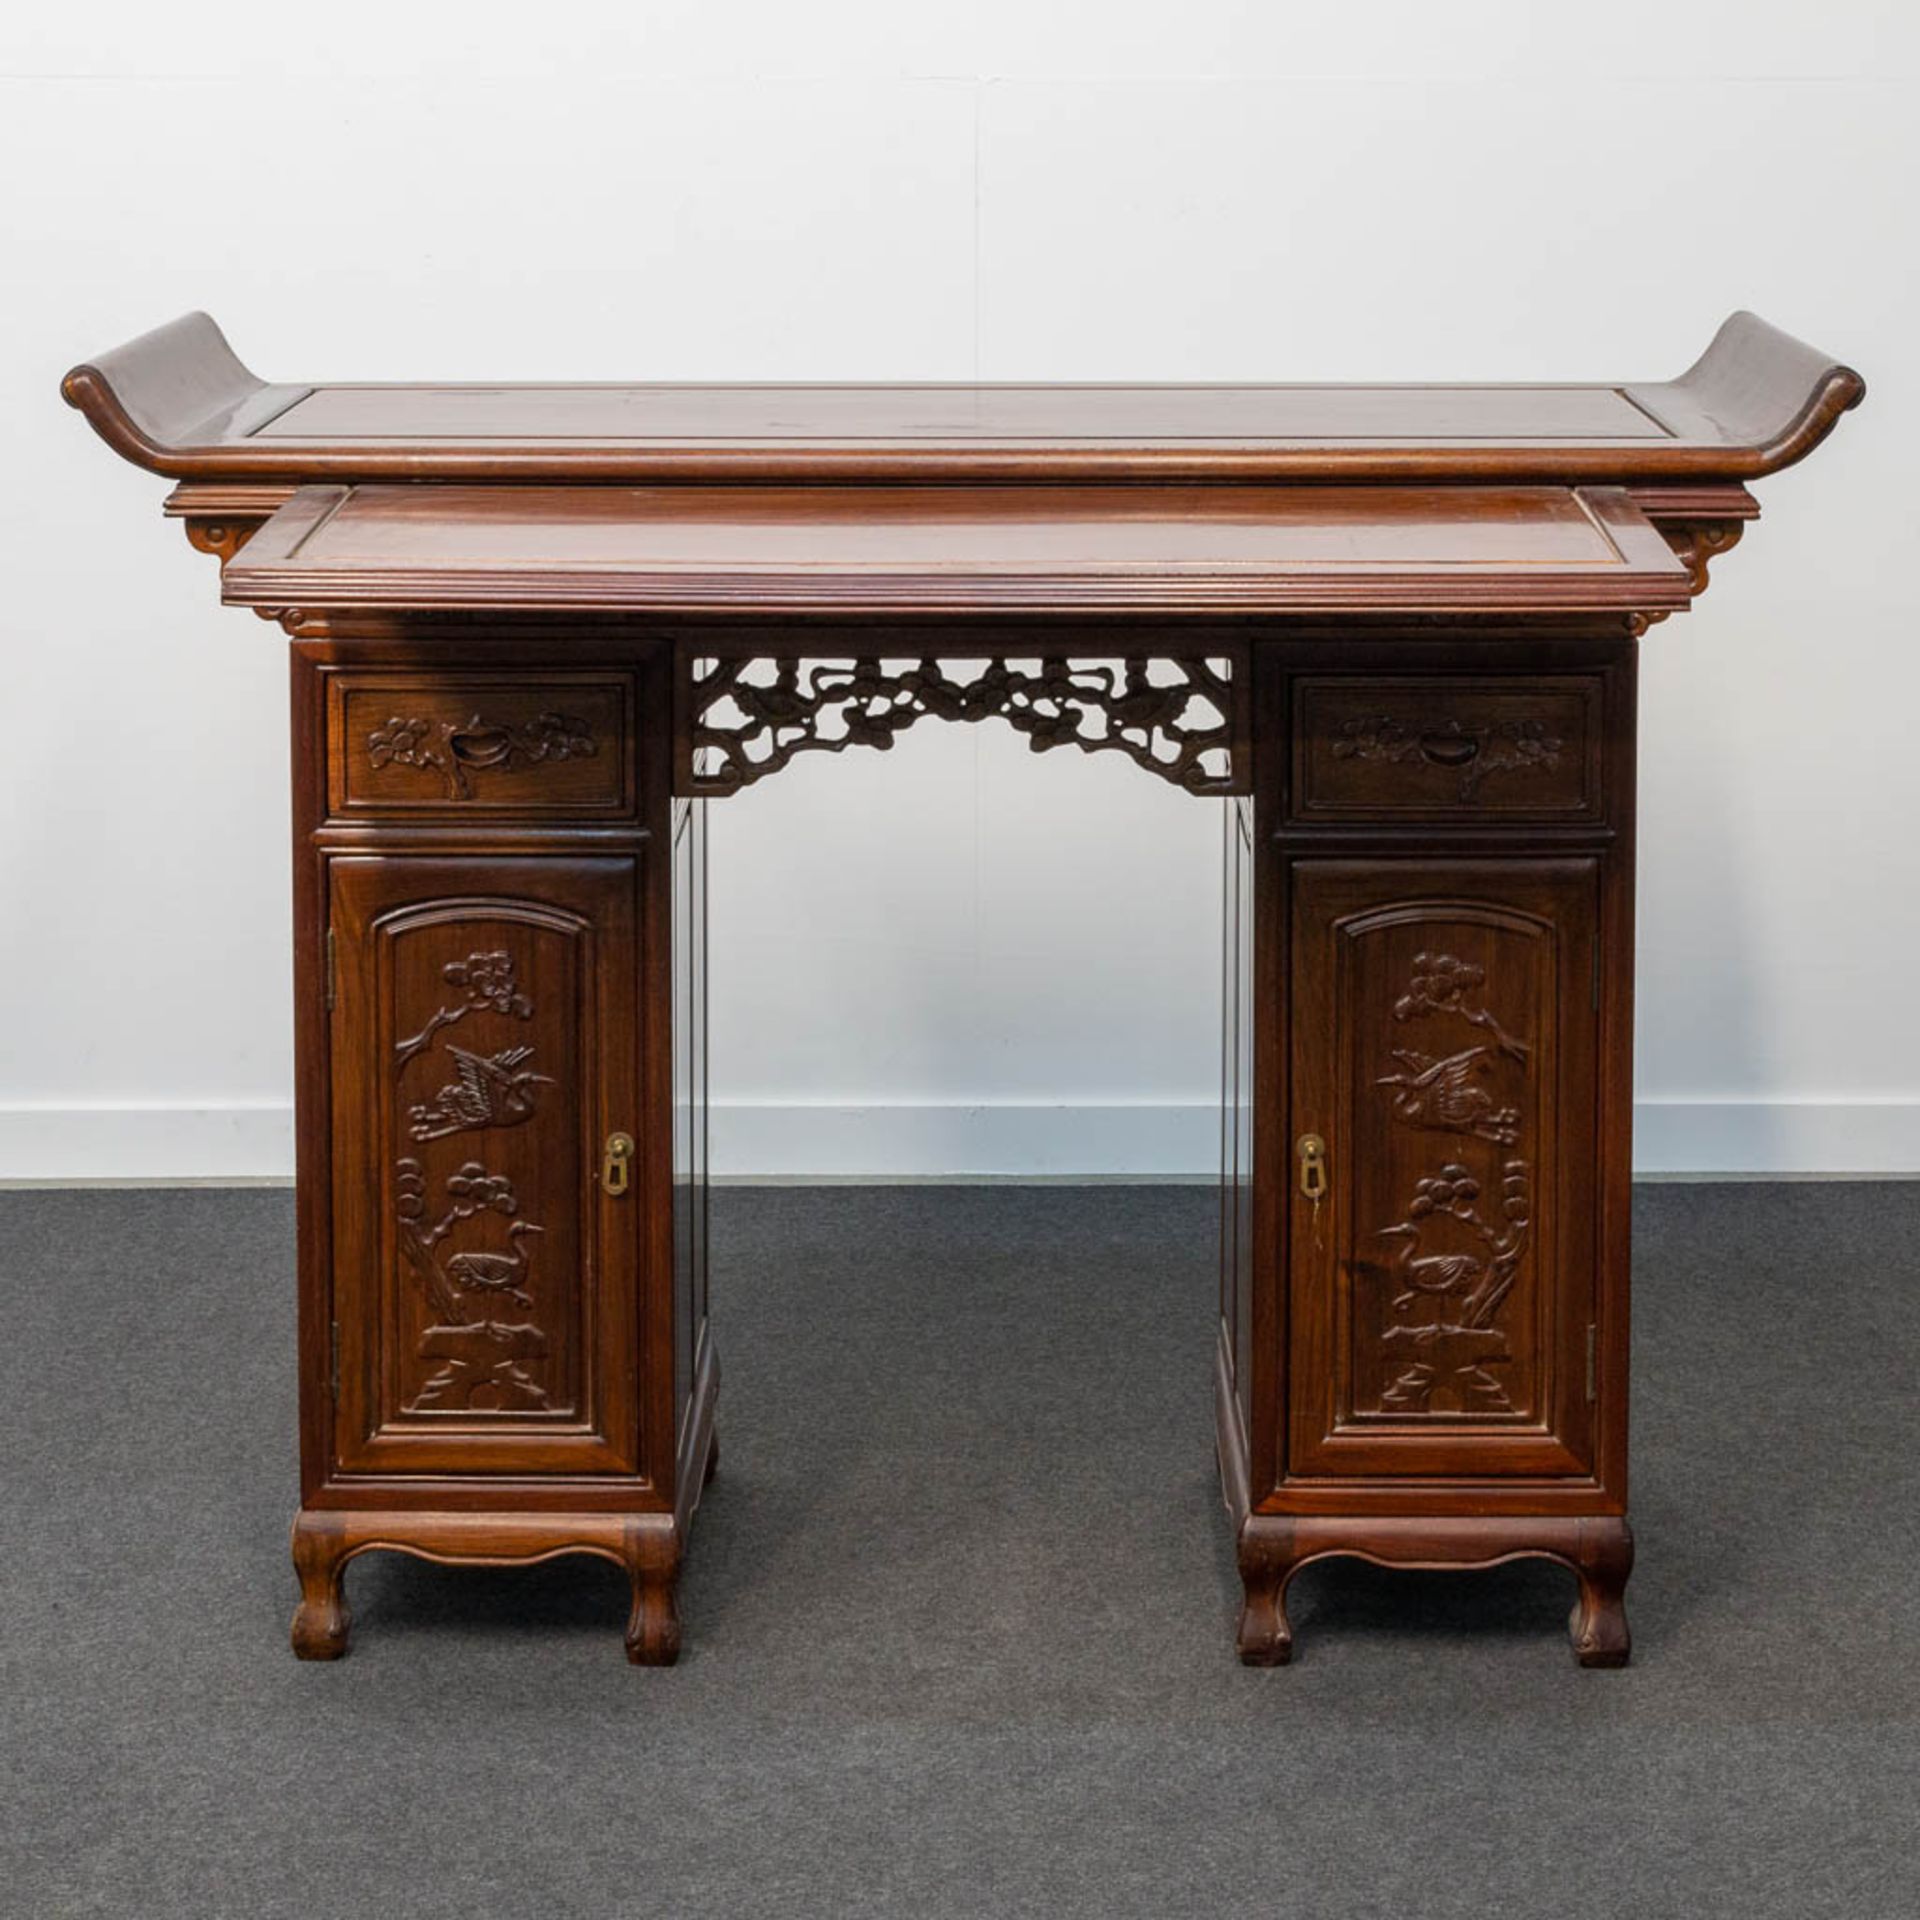 A Chinese hardwood Scroll Desk - Image 13 of 23